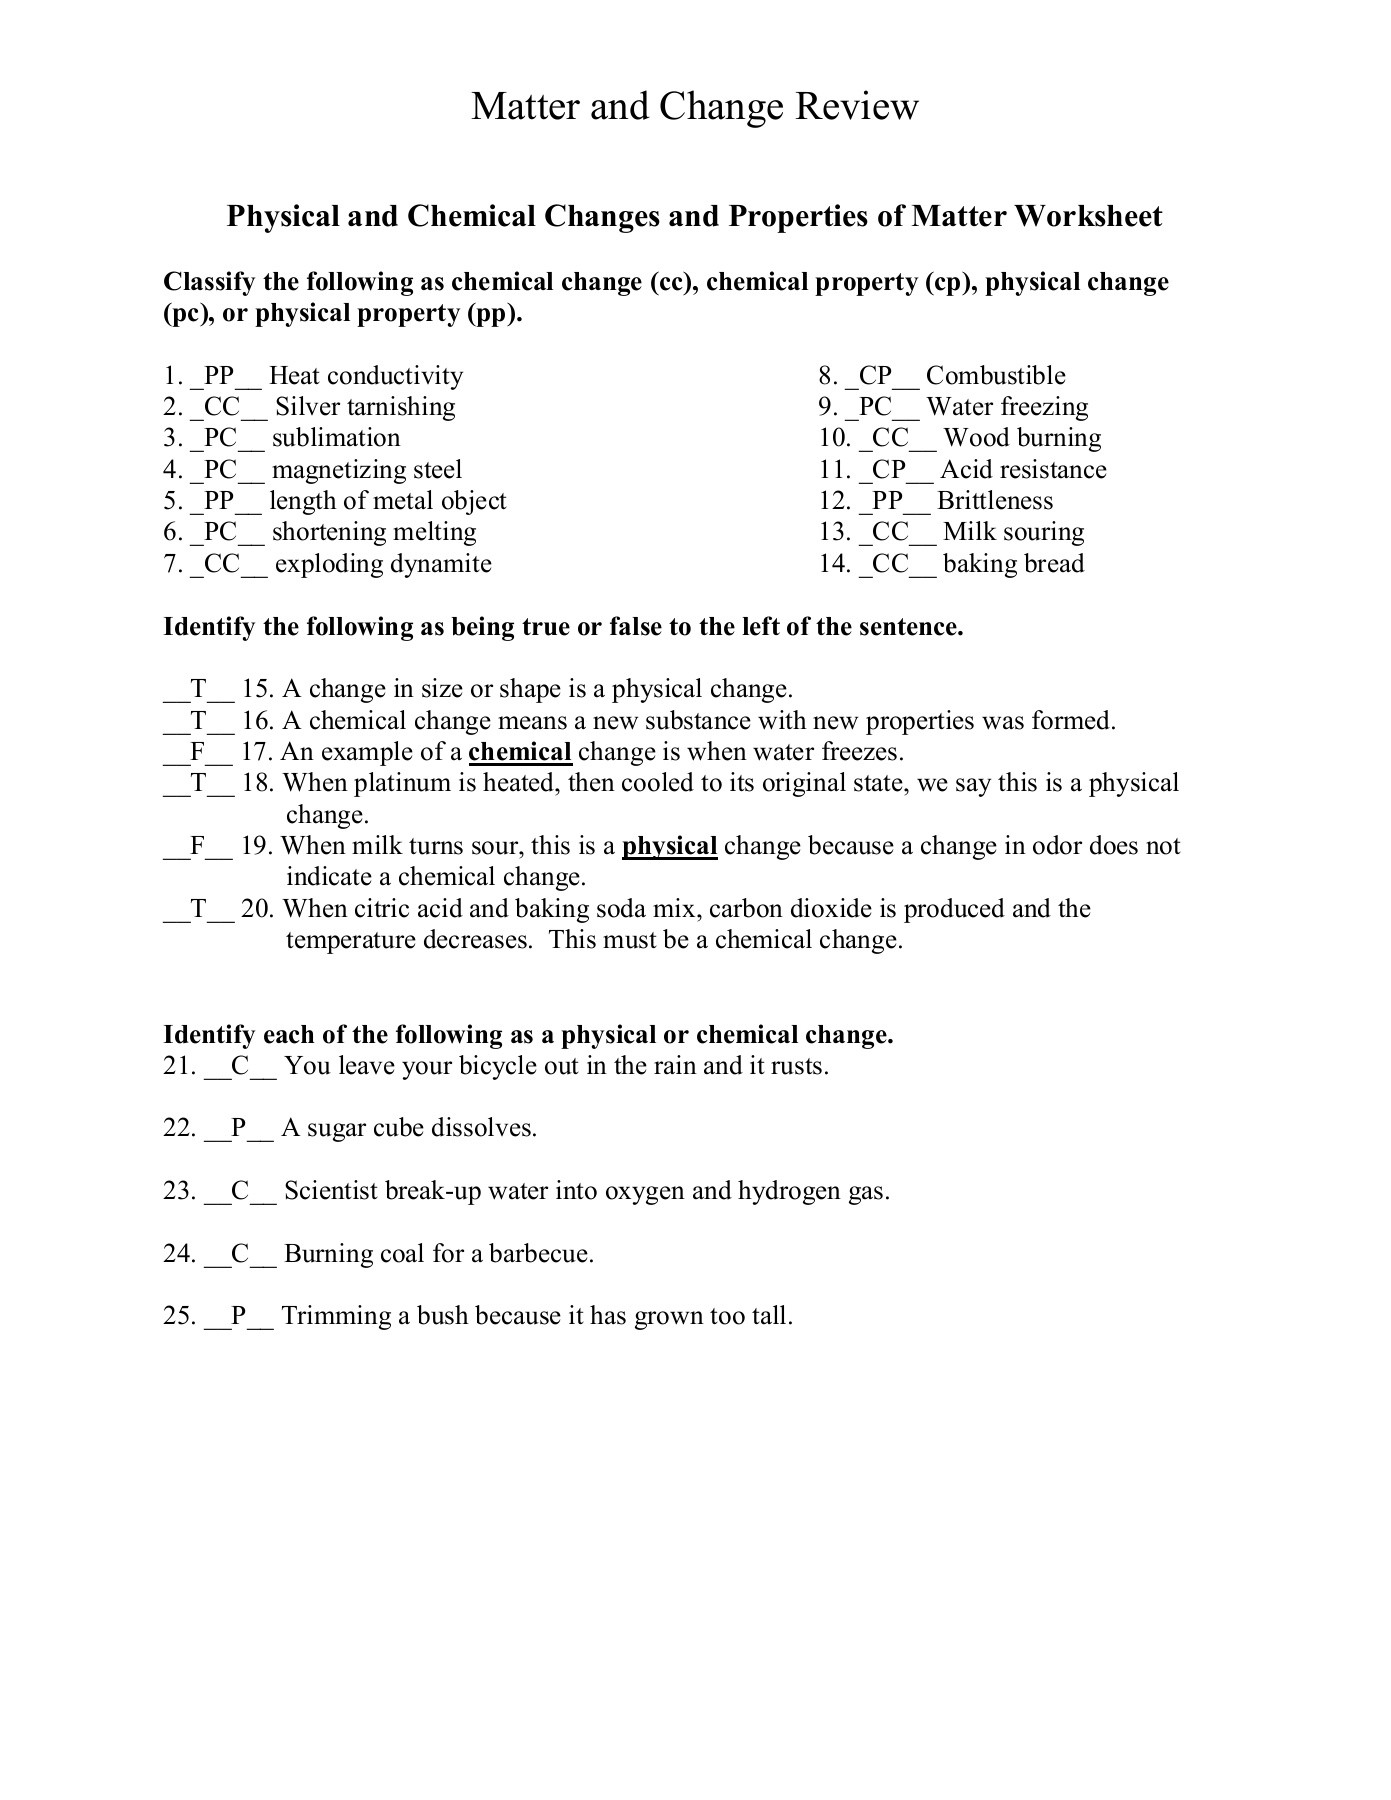 Chemical and Physical Change Worksheet Matter and Change Review Campusesrtbendisd Pages 1